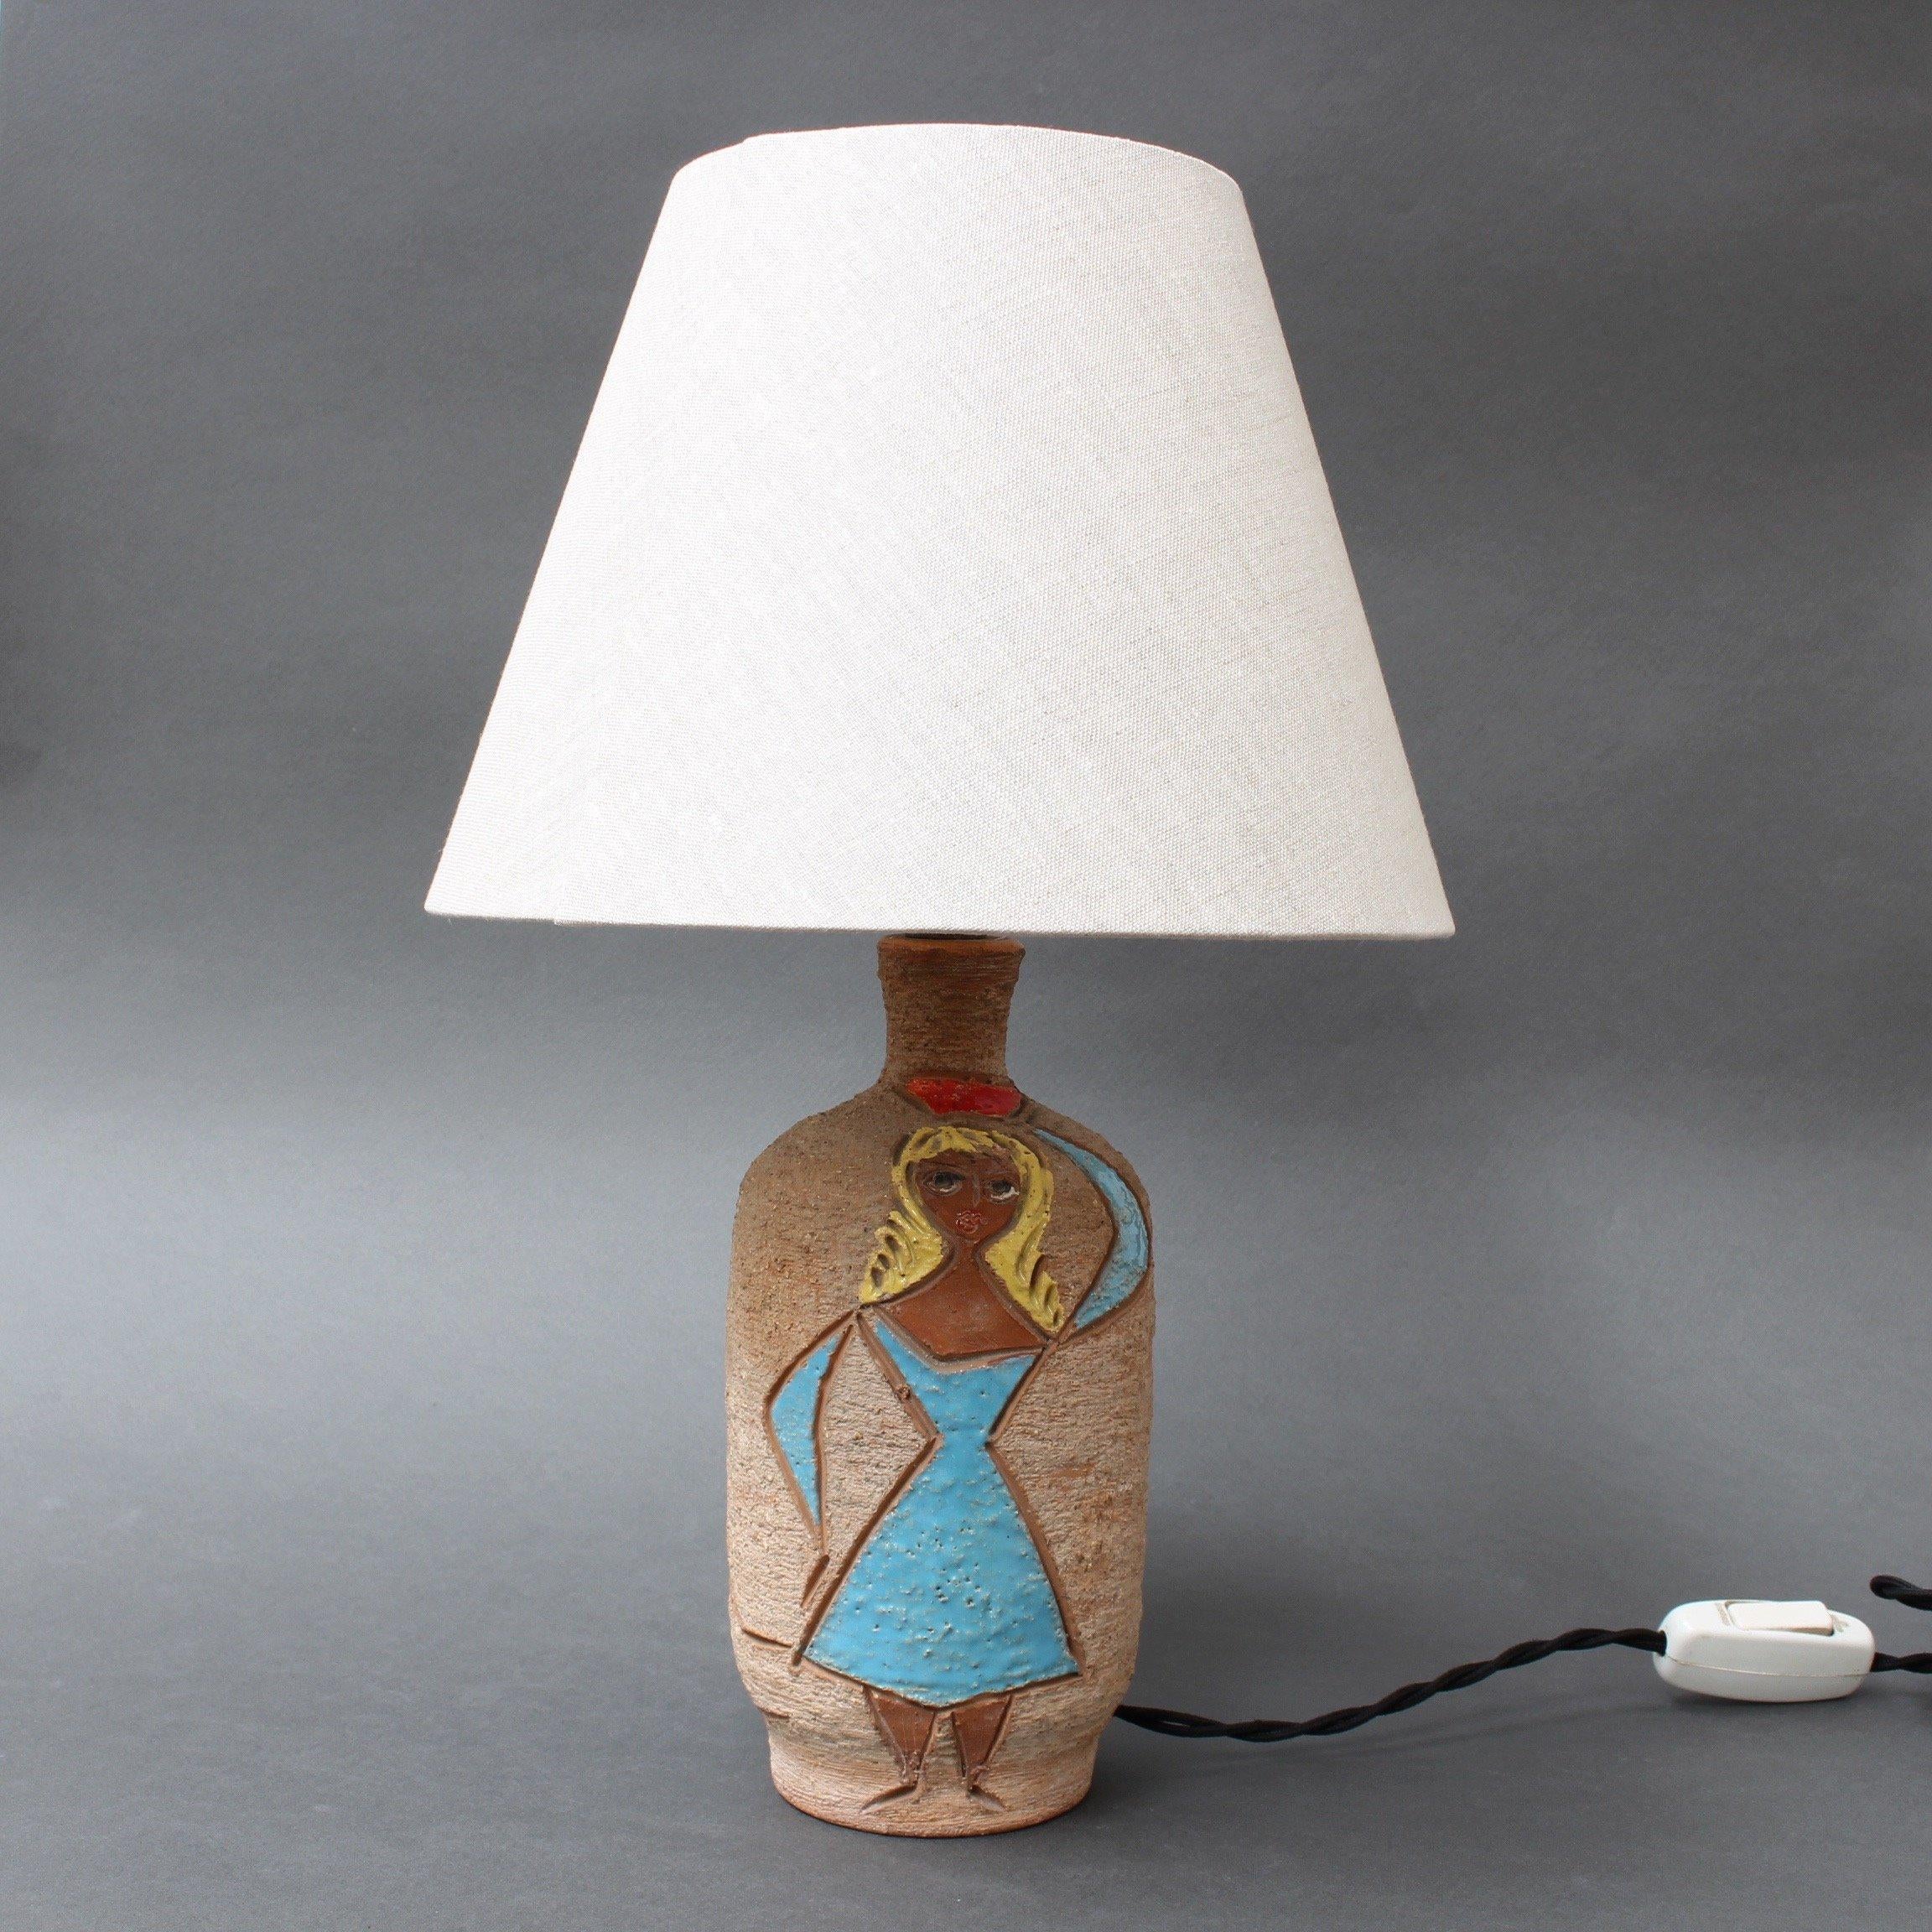 Mid-century Italian ceramic decorative table lamp (circa 1950s) by Fratelli Fanciullacci.cThis lamp immediately transports one to the Italian Riviera of the 1950s to towns like Portofino, San Remo and La Spezia. The sandy-coloured ceramic base is